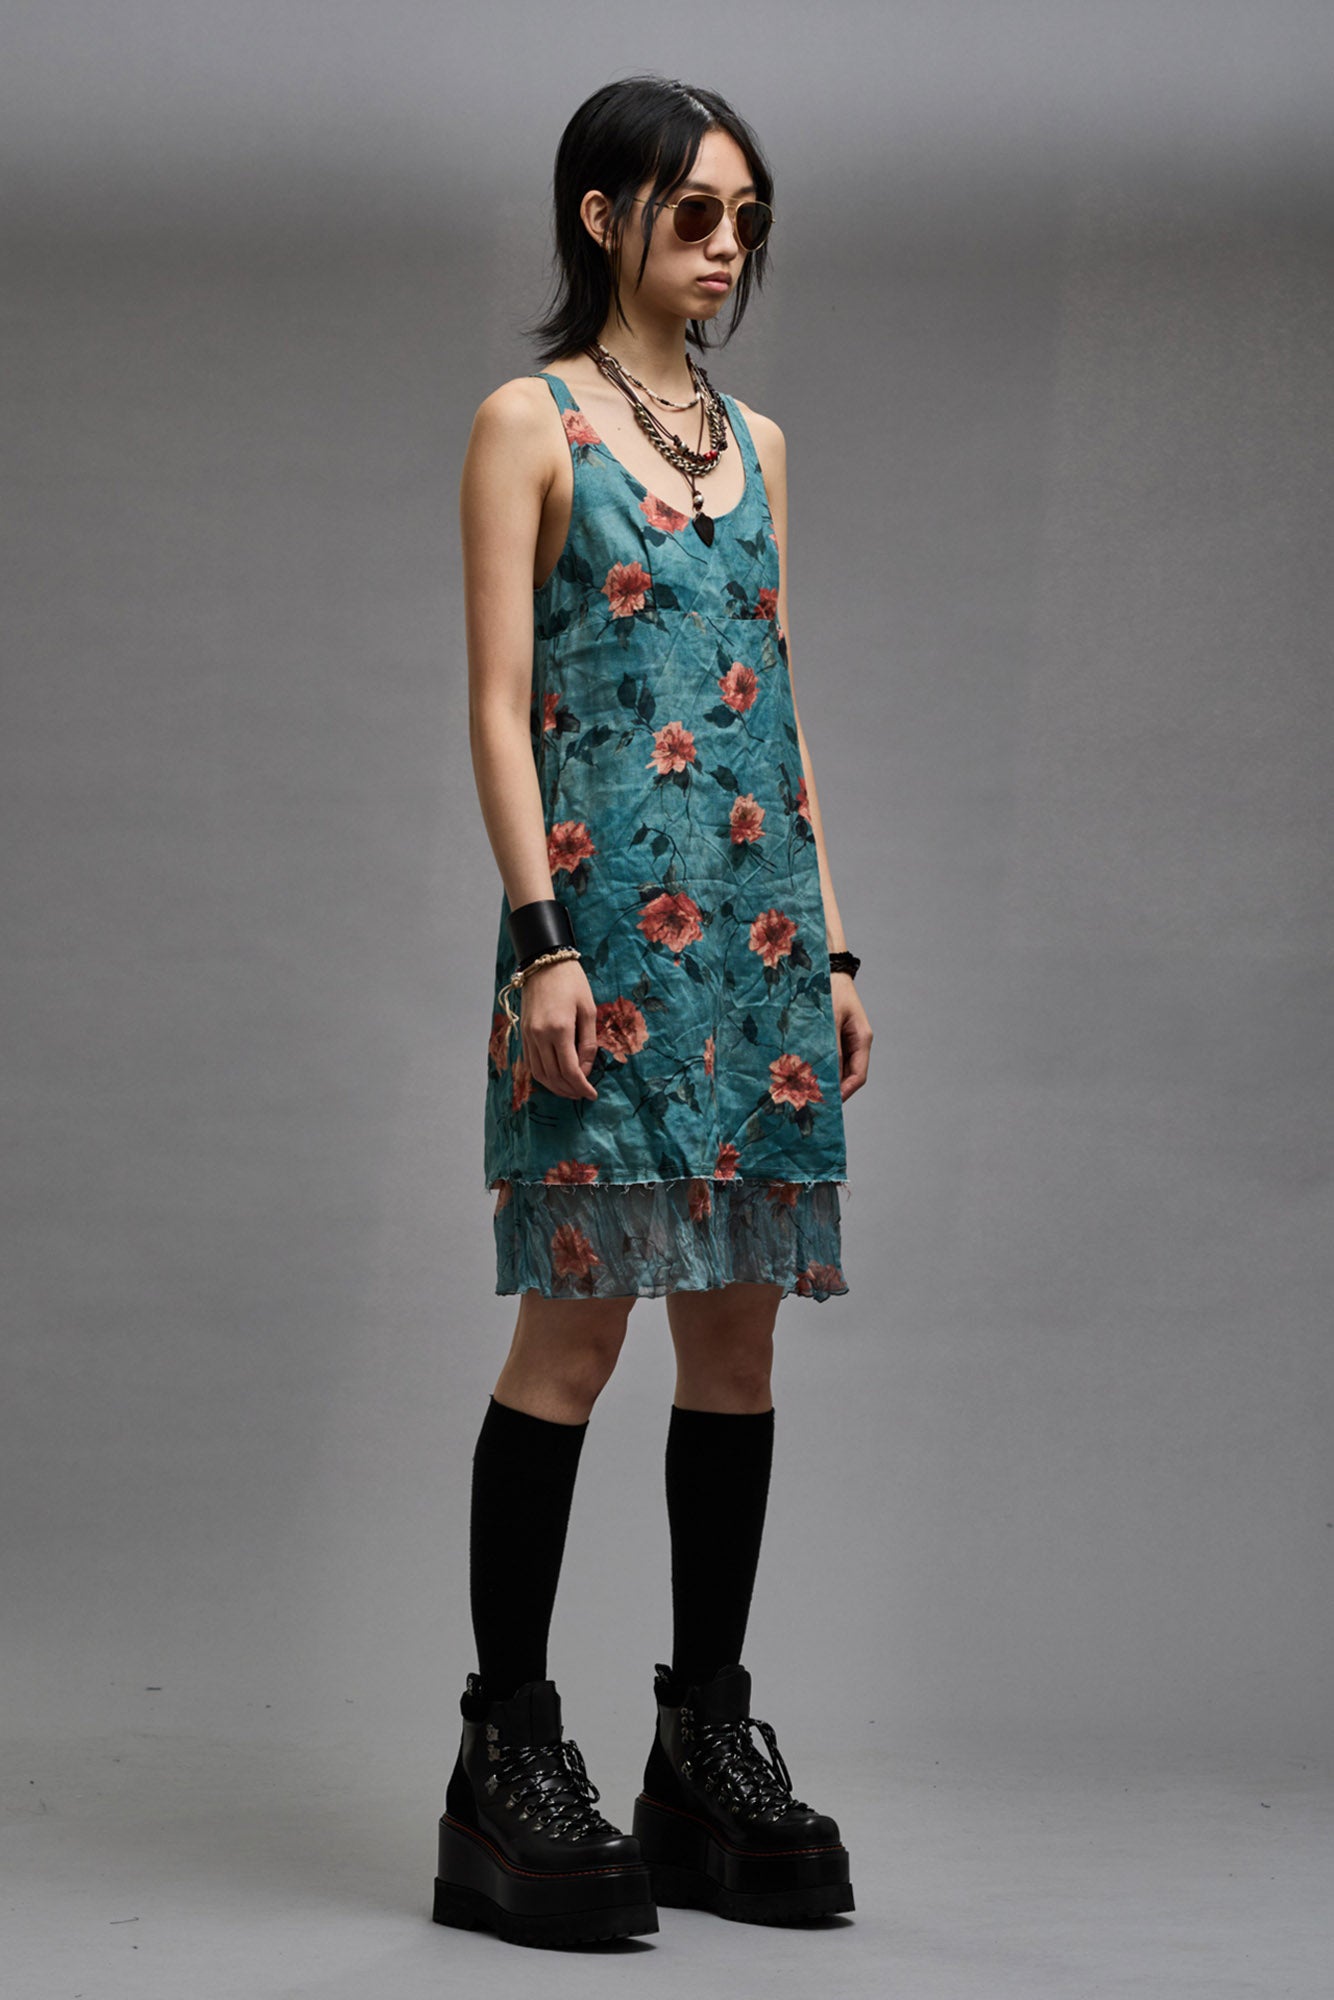 Dresses and Skirts | R13 Denim Official Site